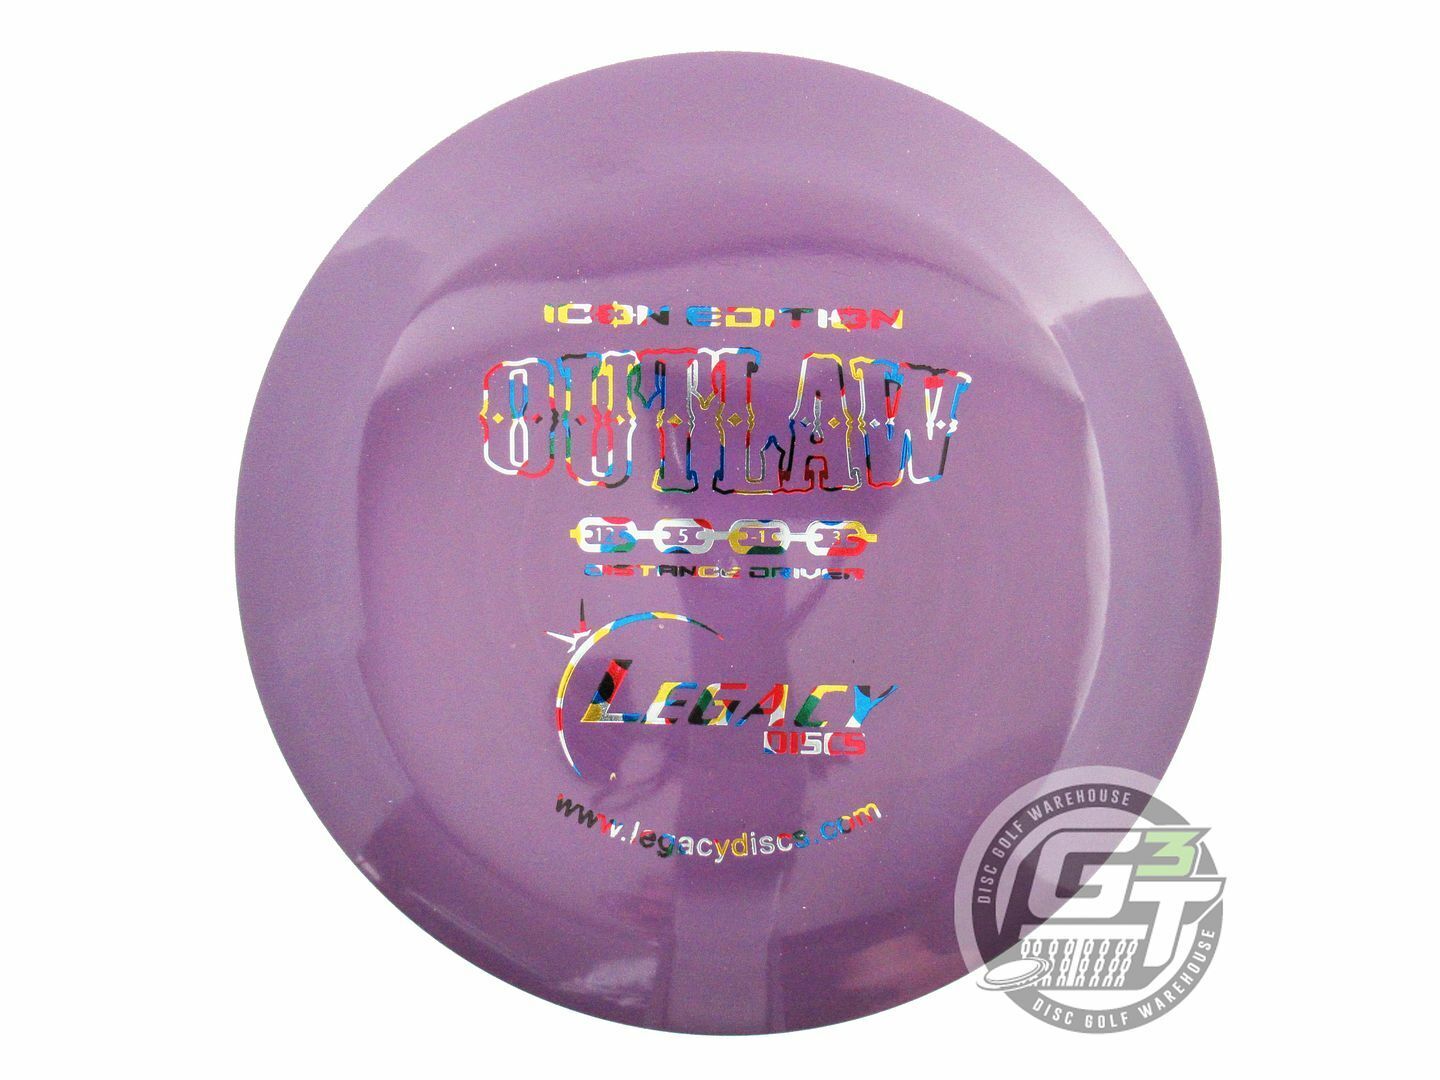 Legacy Icon Edition Outlaw Distance Driver Golf Disc (Individually Listed)